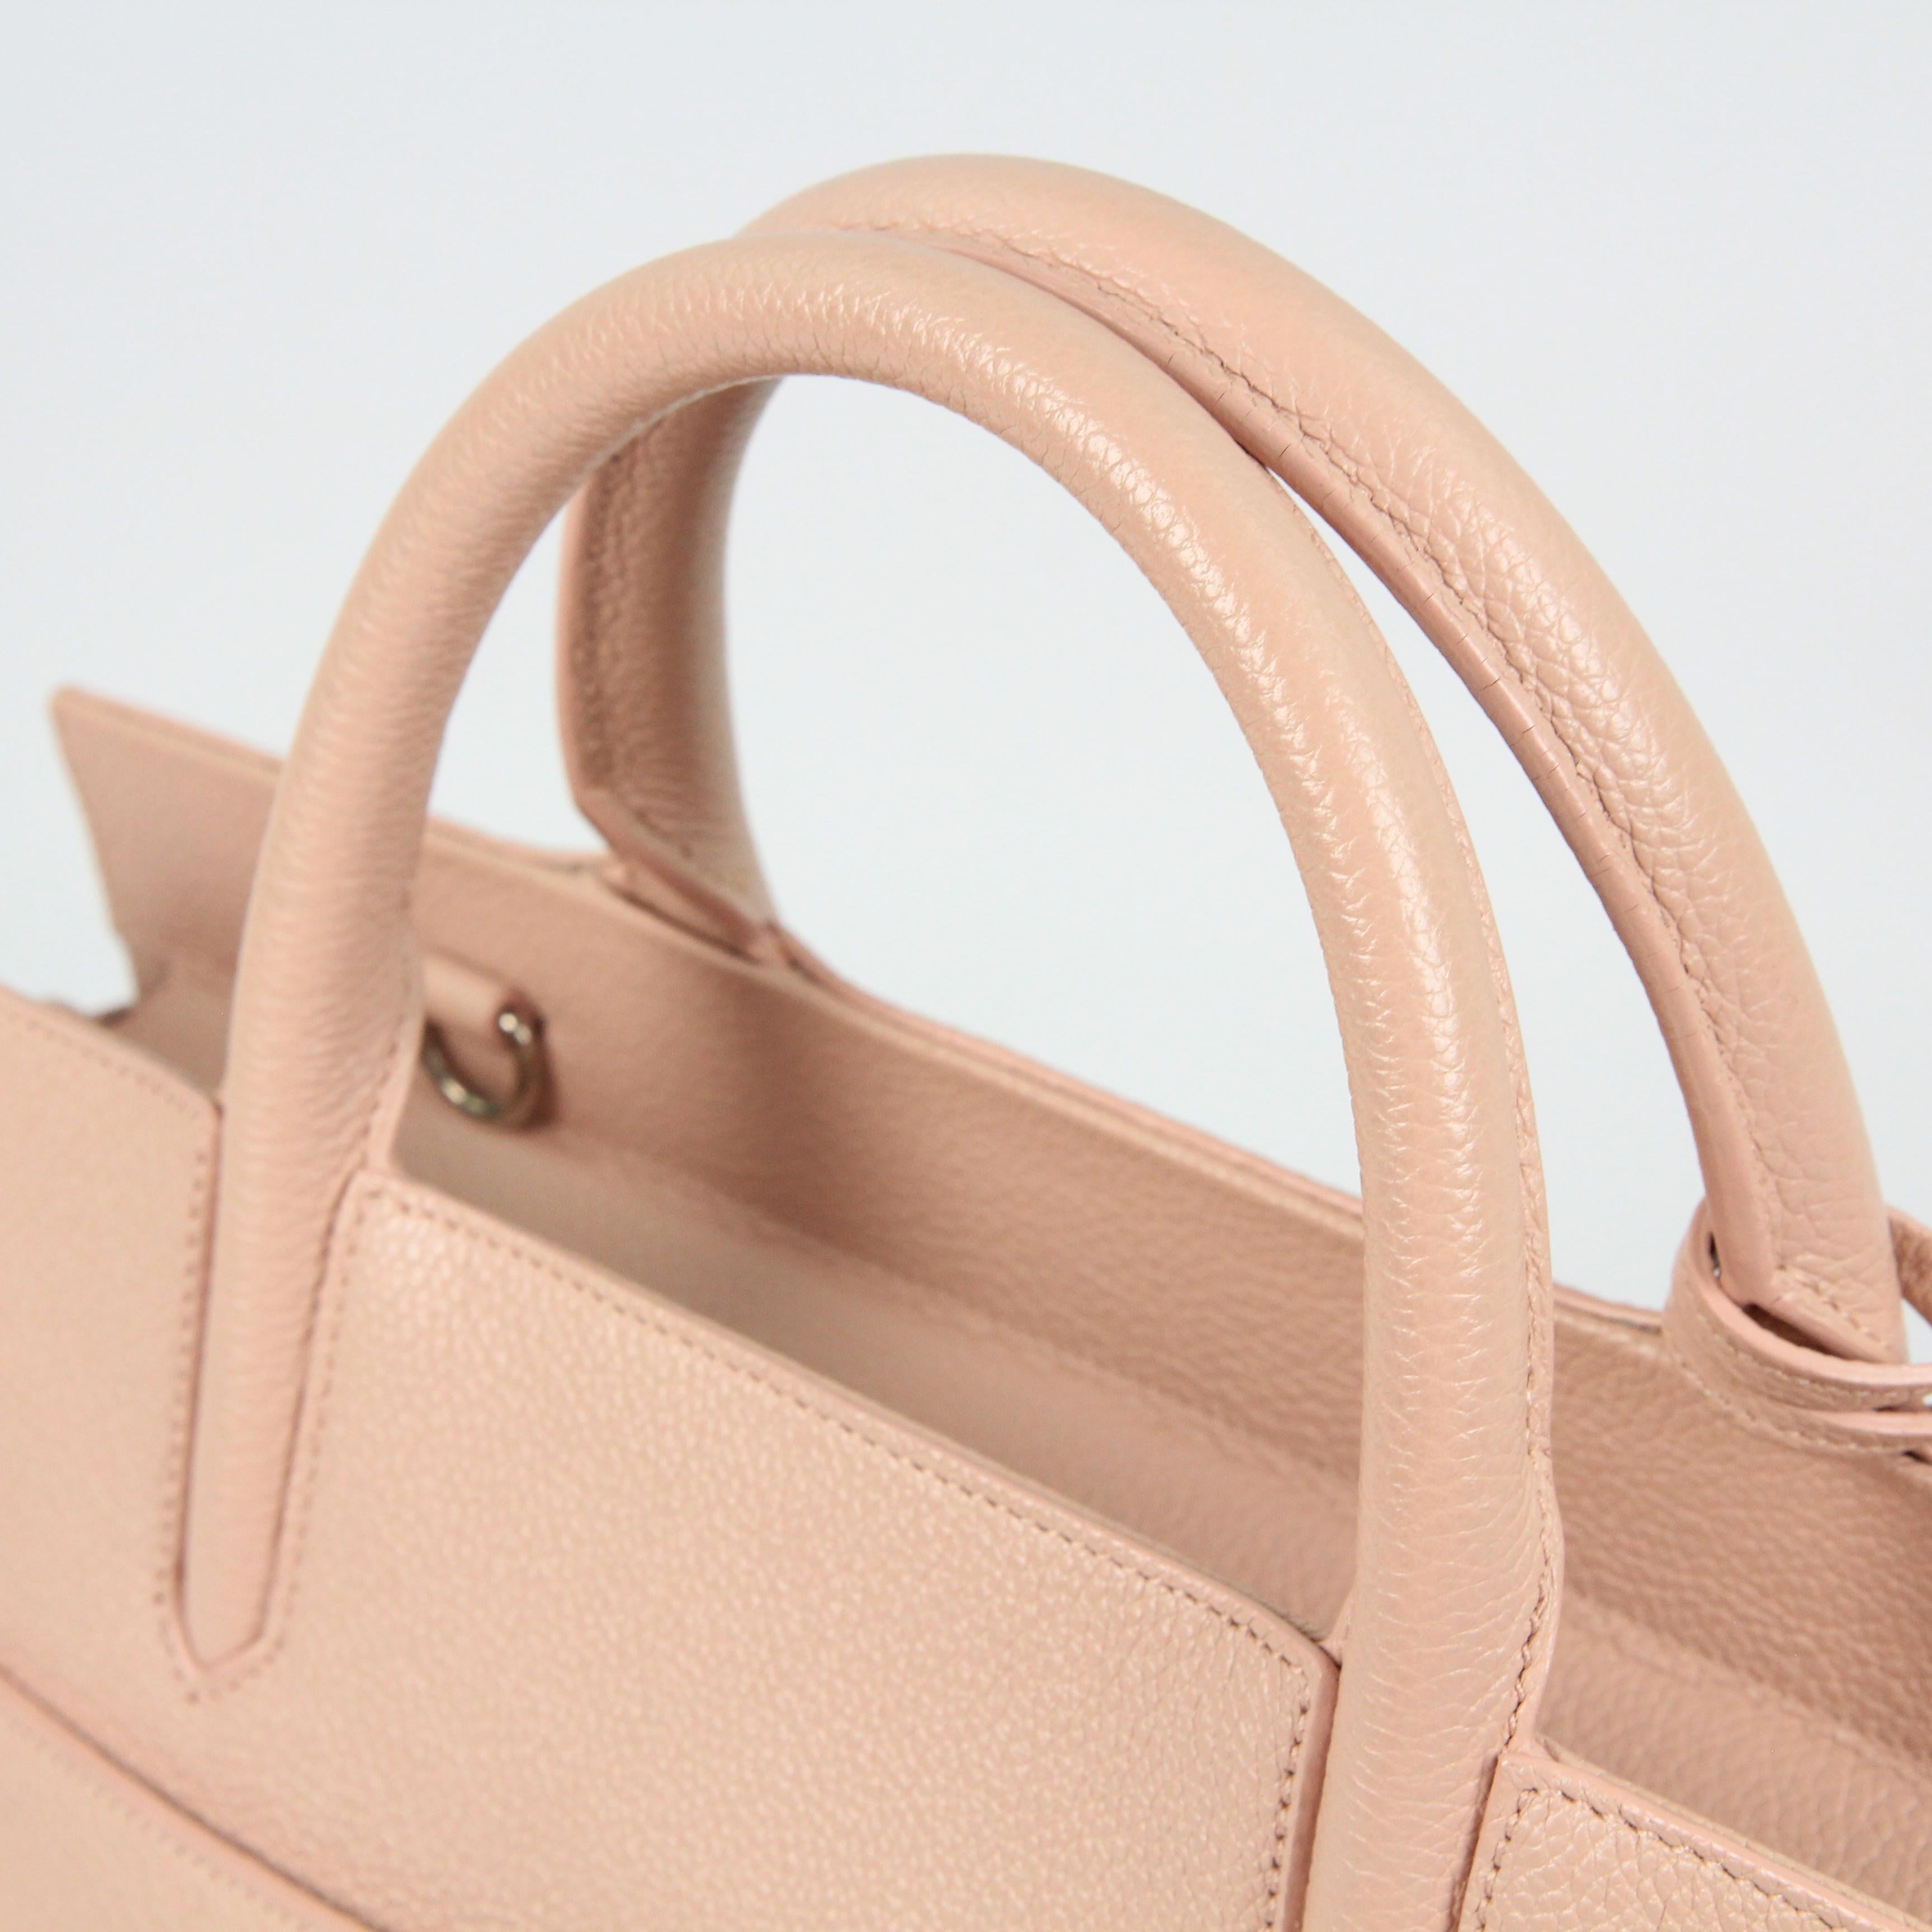 This is an authentic SAINT LAURENT Leather Cabas Rive Gauche in Beige Pink. This chic tote is crafted of calfskin leather in beige pink. The bag features rolled leather top handles and sewn anchors, button snap expandable side panels and a hanging